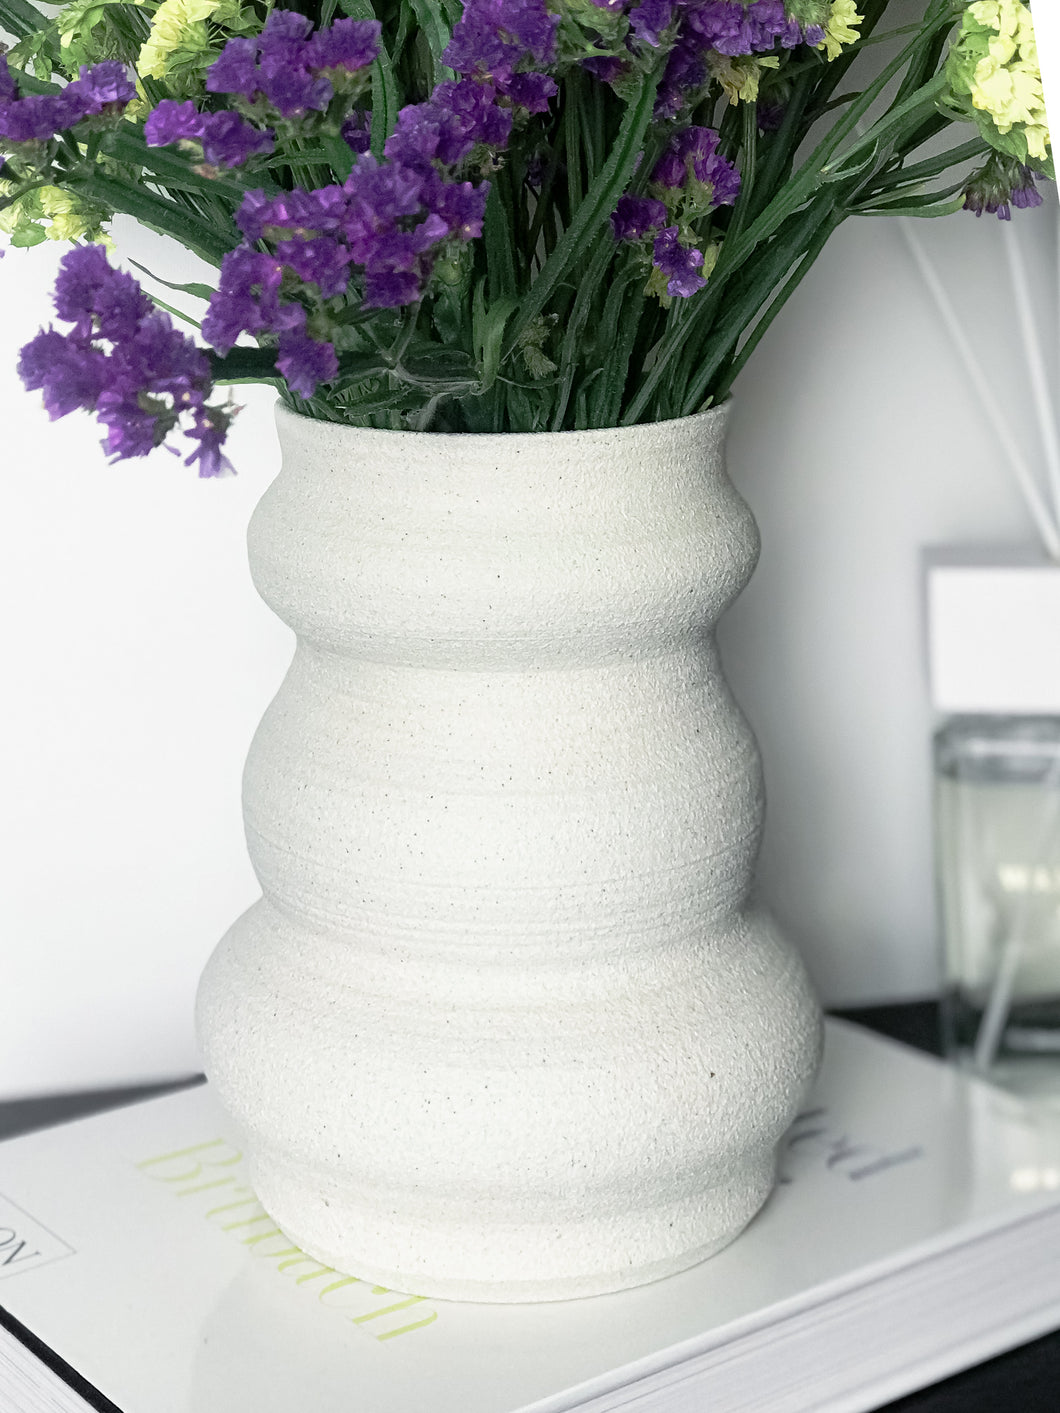 Original Hand-made Ceramic Vase - White Textured Vase With Wiggle - Truly One Of A Kind